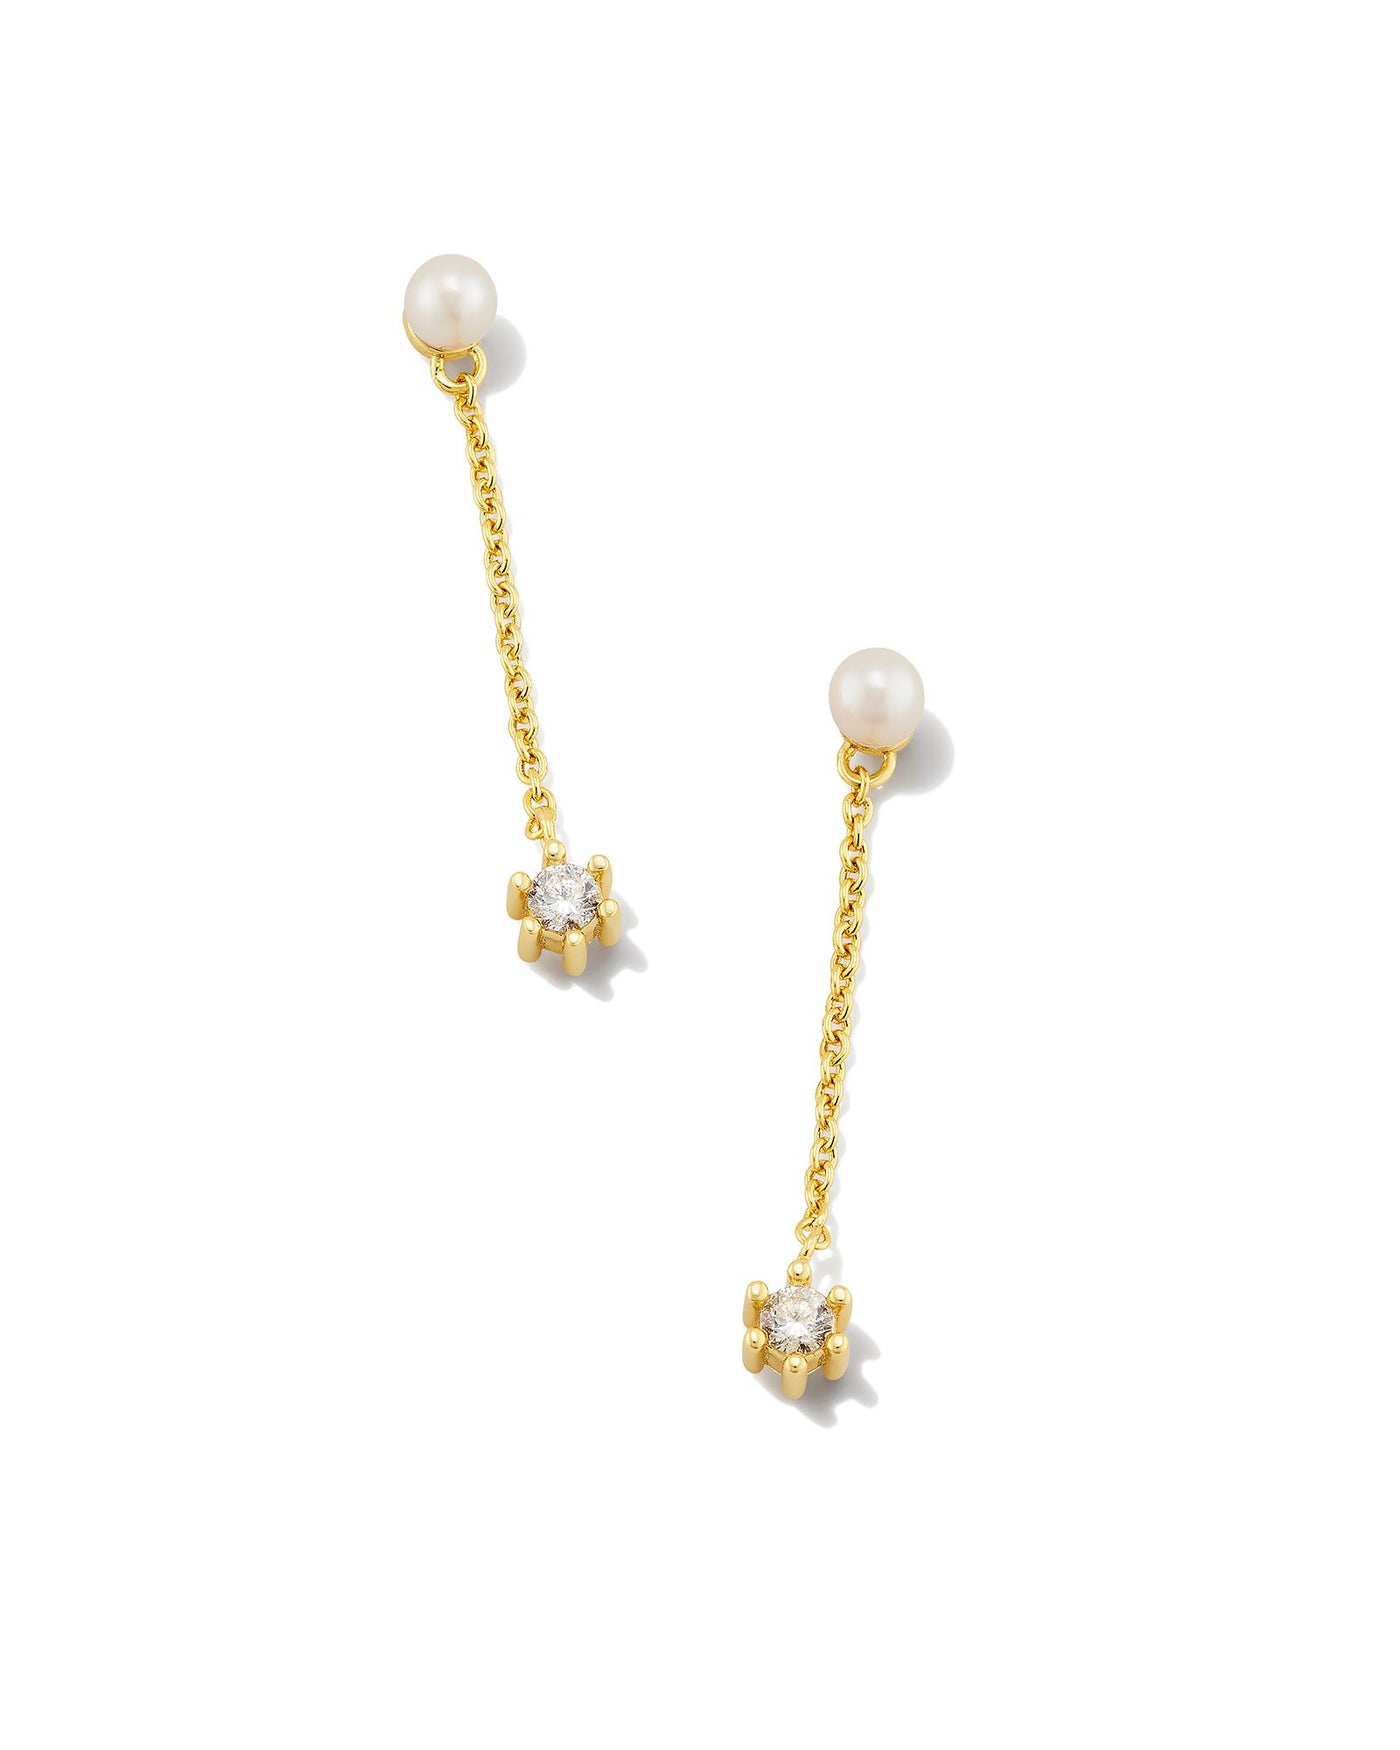 Kendra Scott Leighton Pearl Linear Earrings Gold White Pearl-Earrings-Kendra Scott-Market Street Nest, Fashionable Clothing, Shoes and Home Décor Located in Mabank, TX